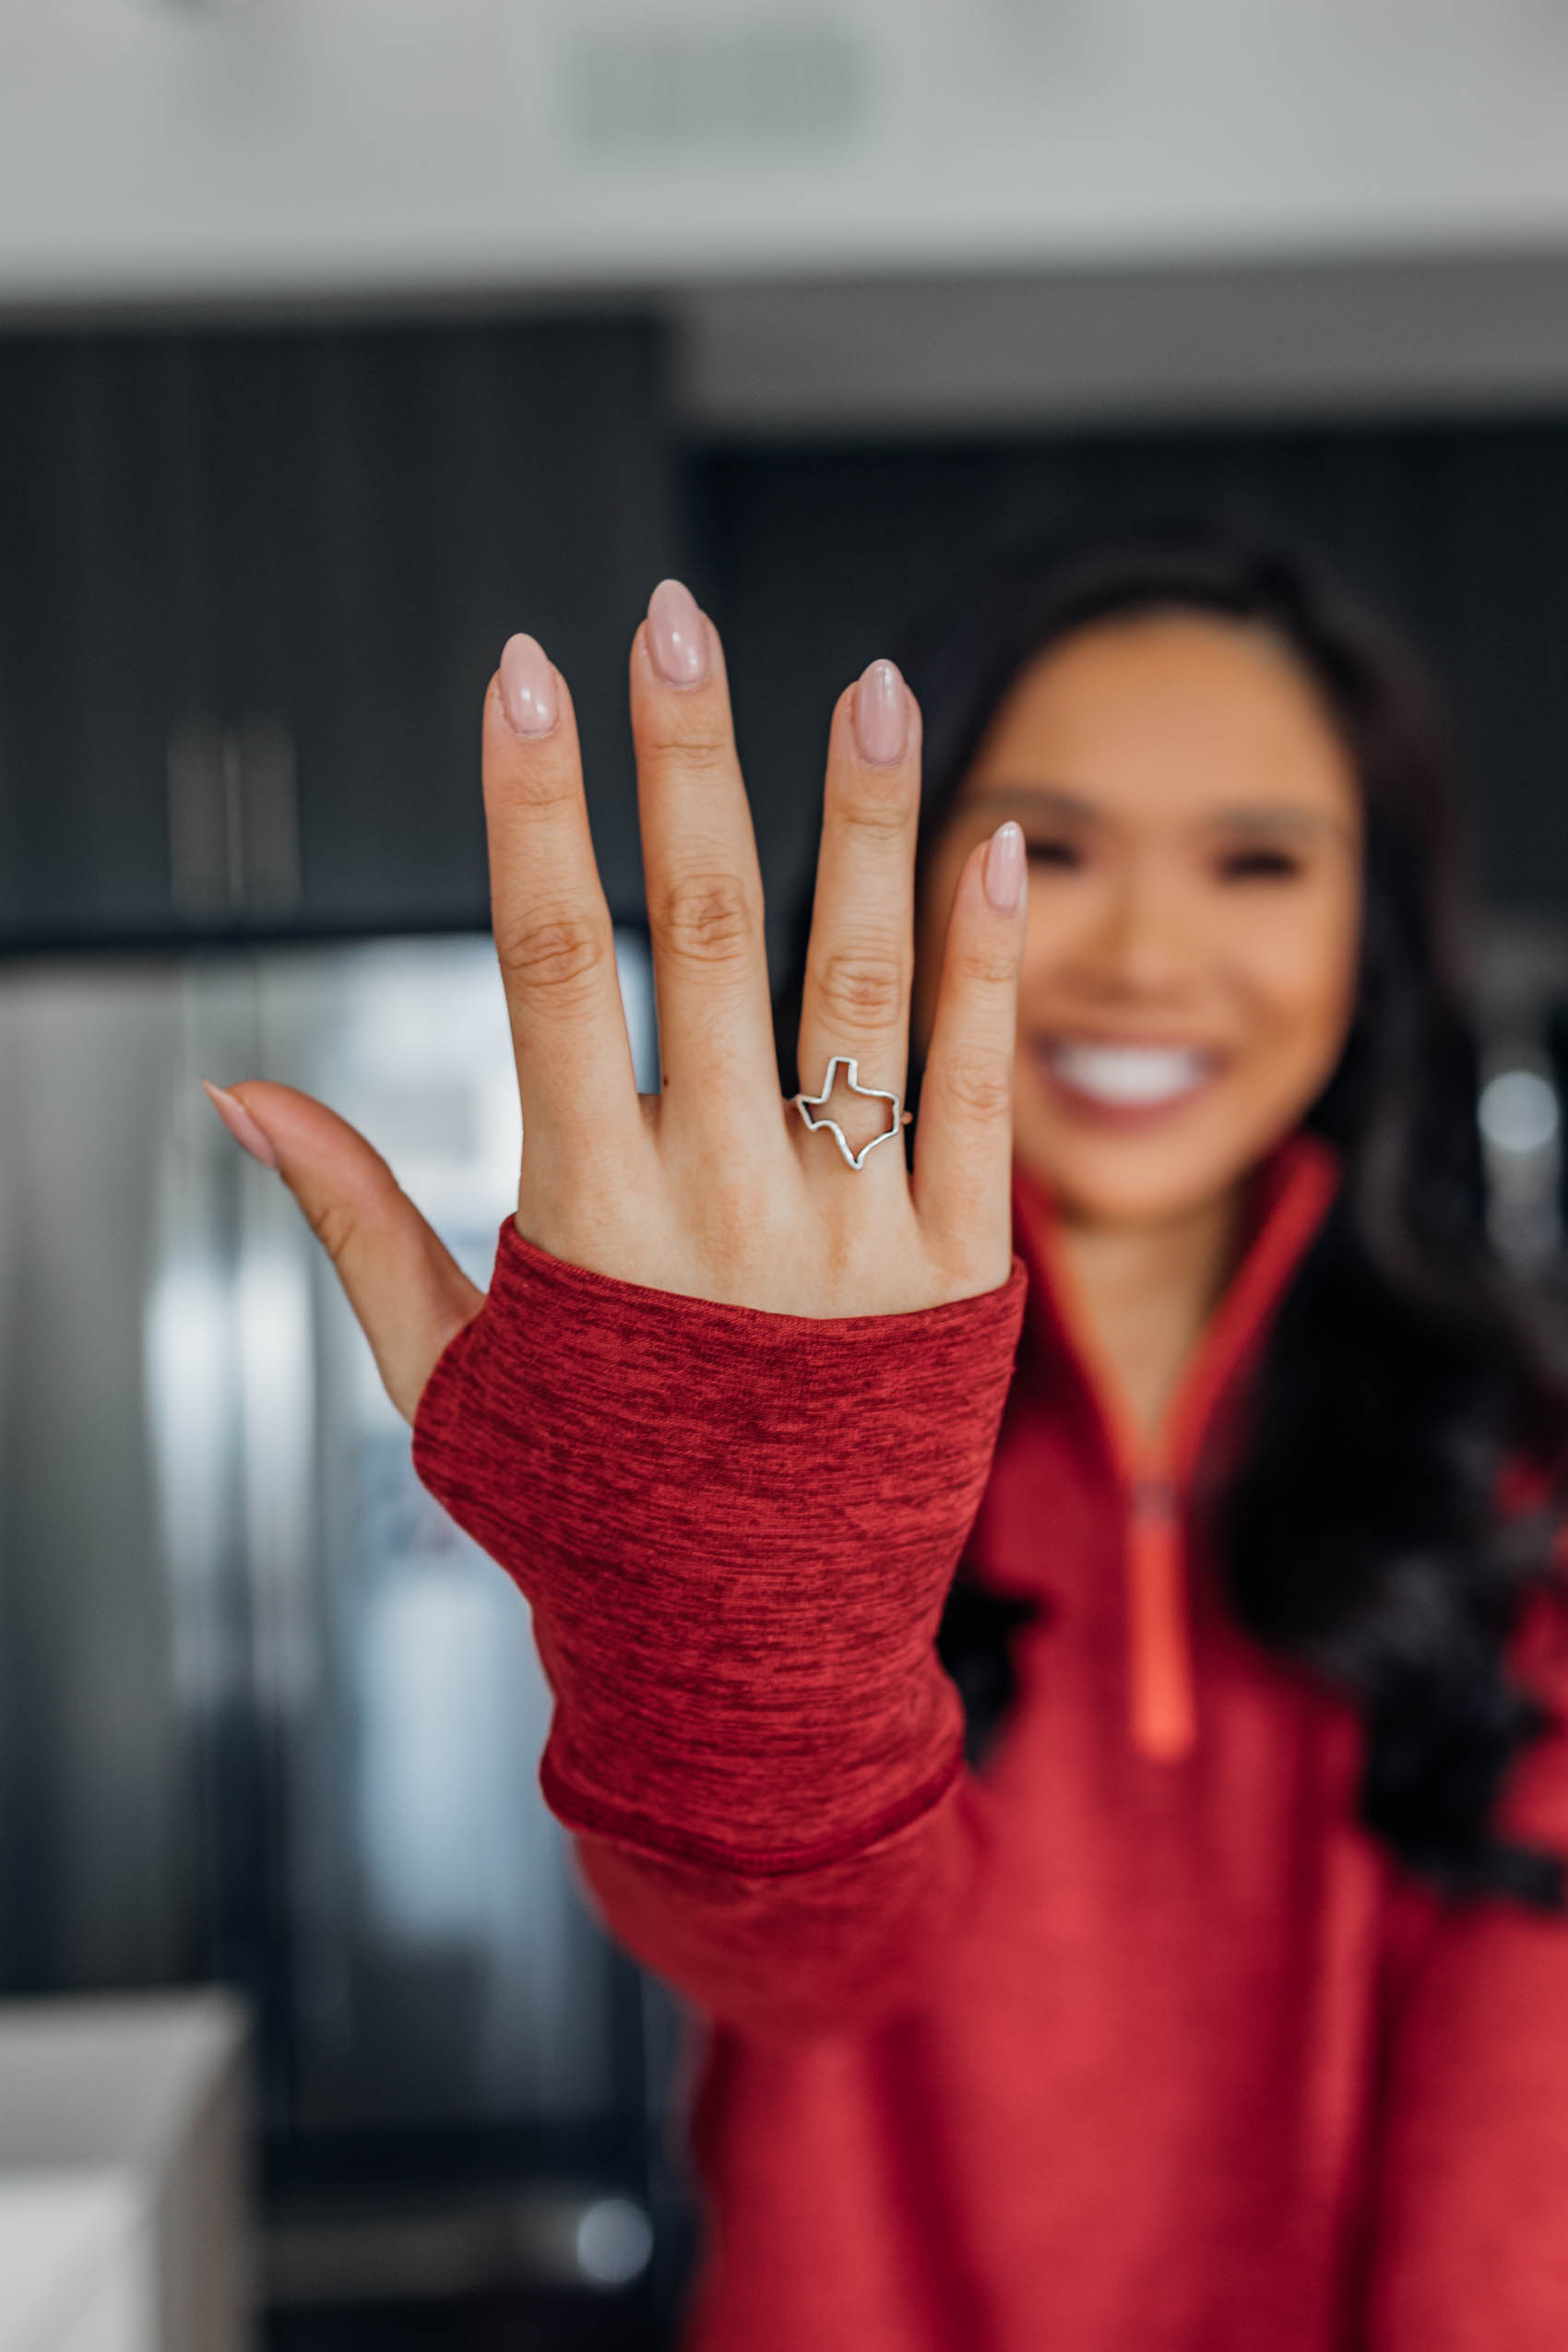 Blogger Hoang-Kim of Colorandchic.com shows off her Texas ring